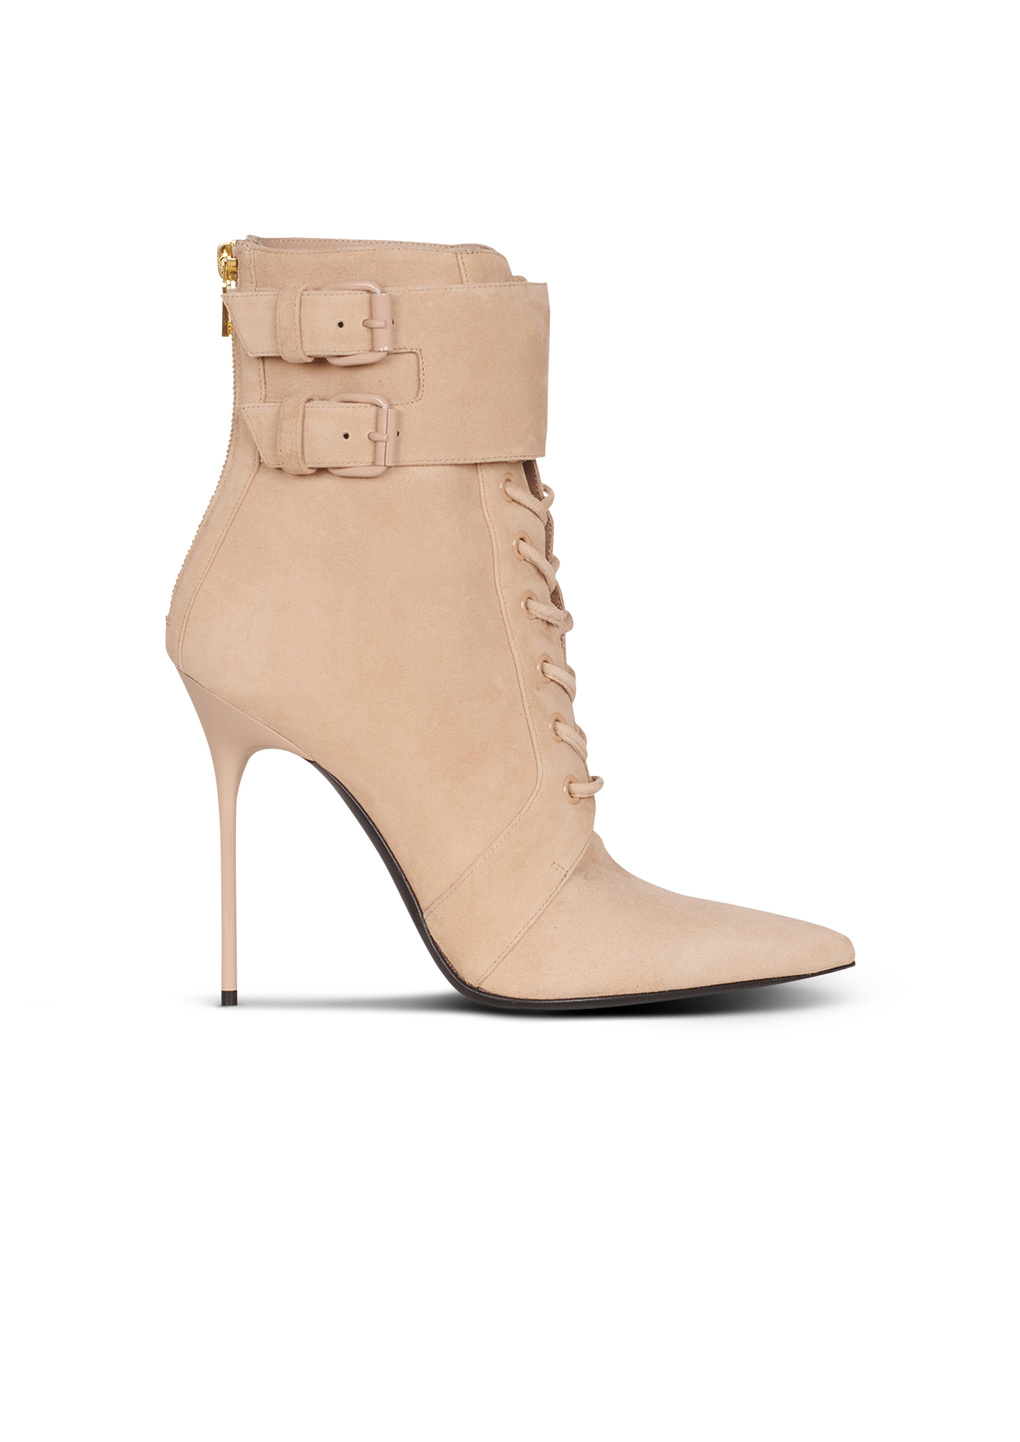 Suede Uria ankle boots, beige, hi-res